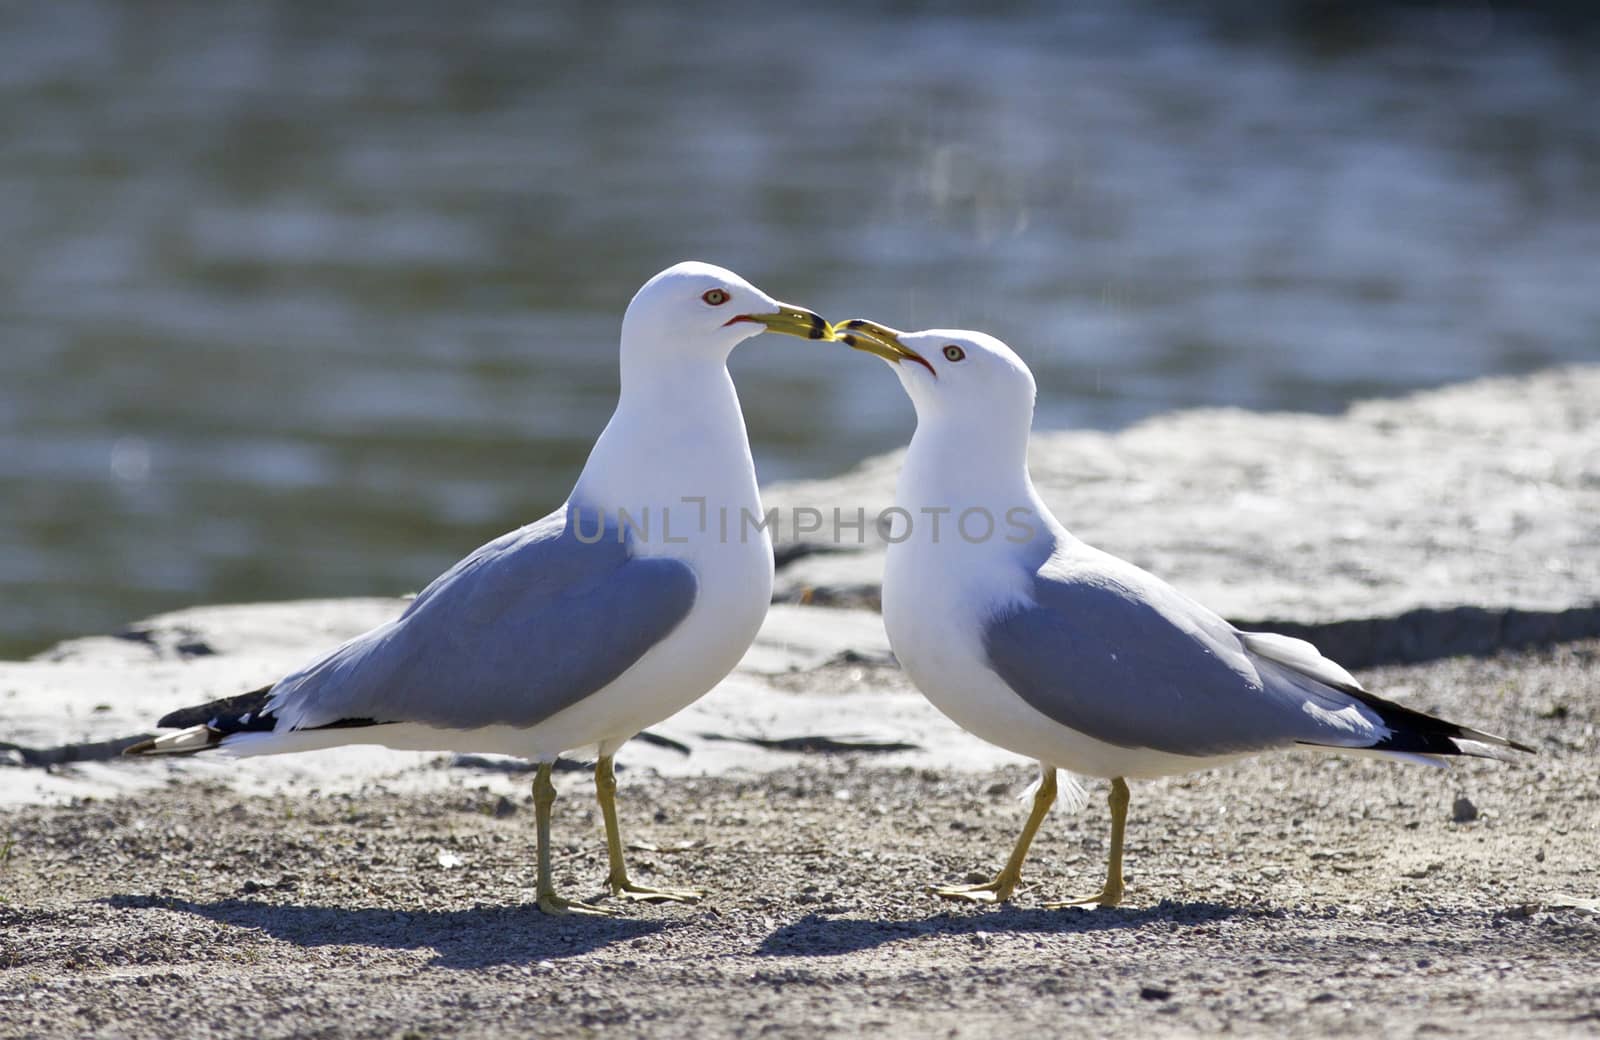 Beautiful photo of two kissing gulls by teo